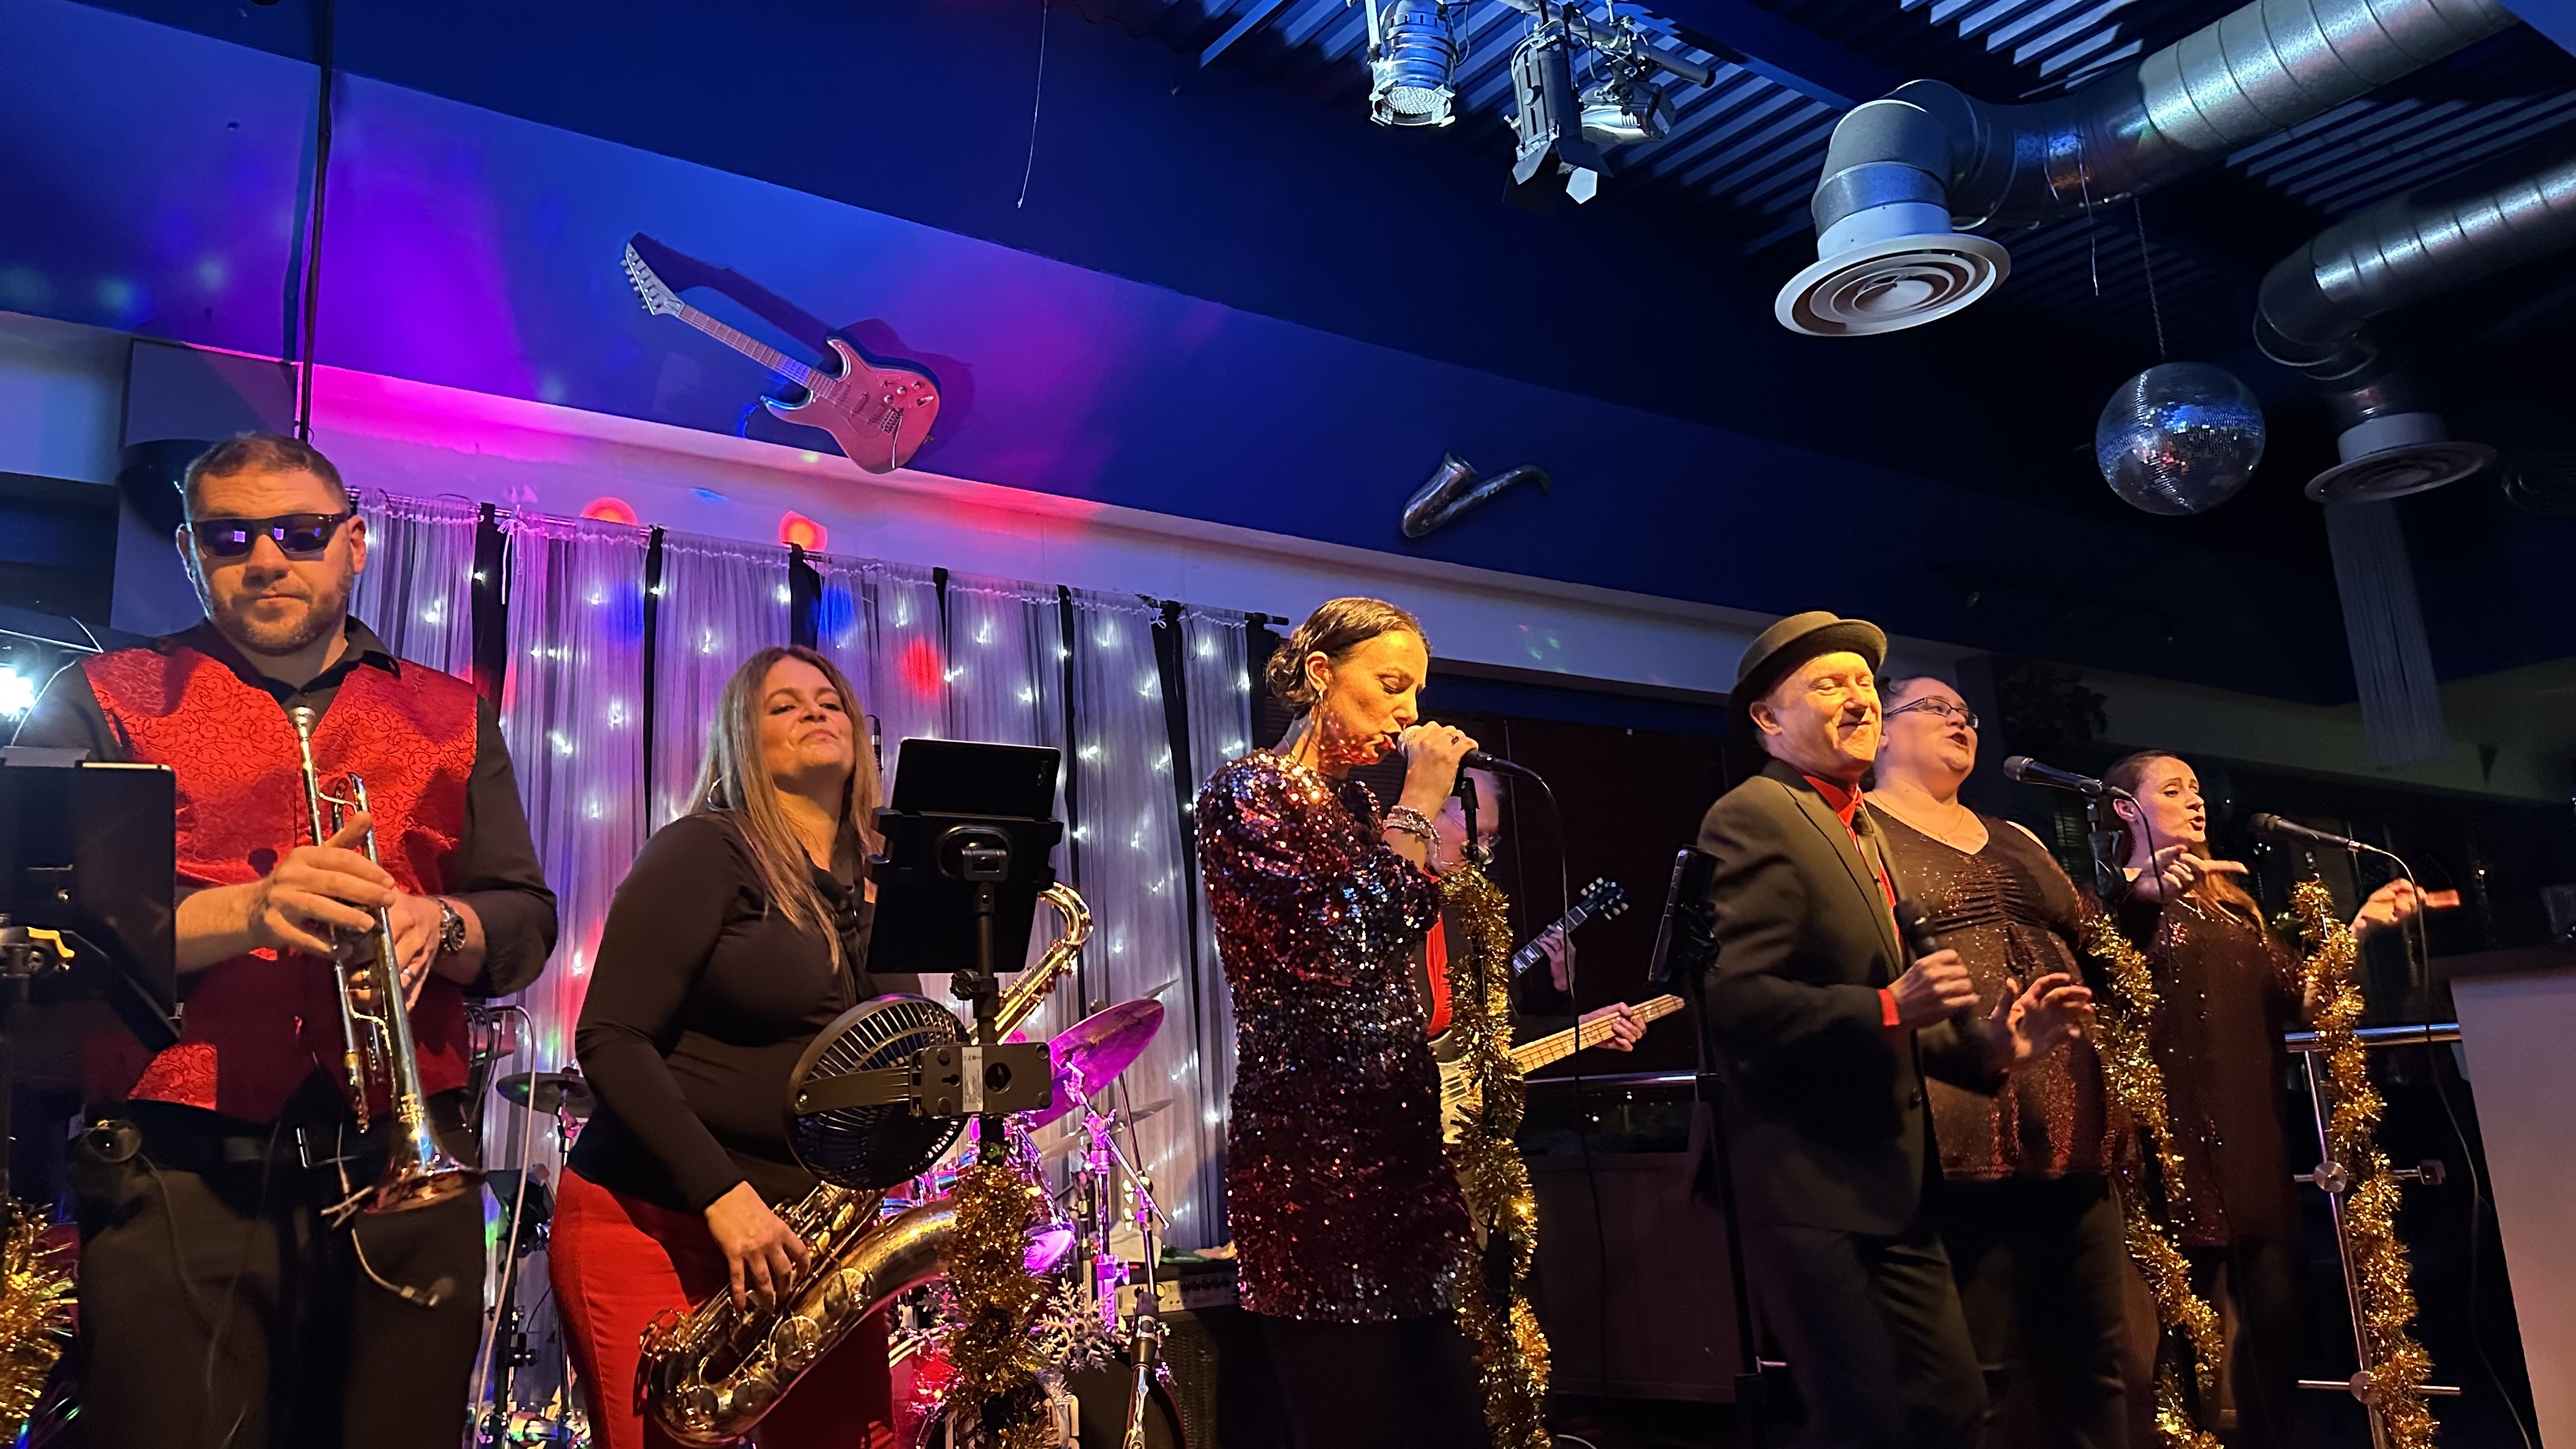 5 reasons to come to a live music event at The Jazz Café